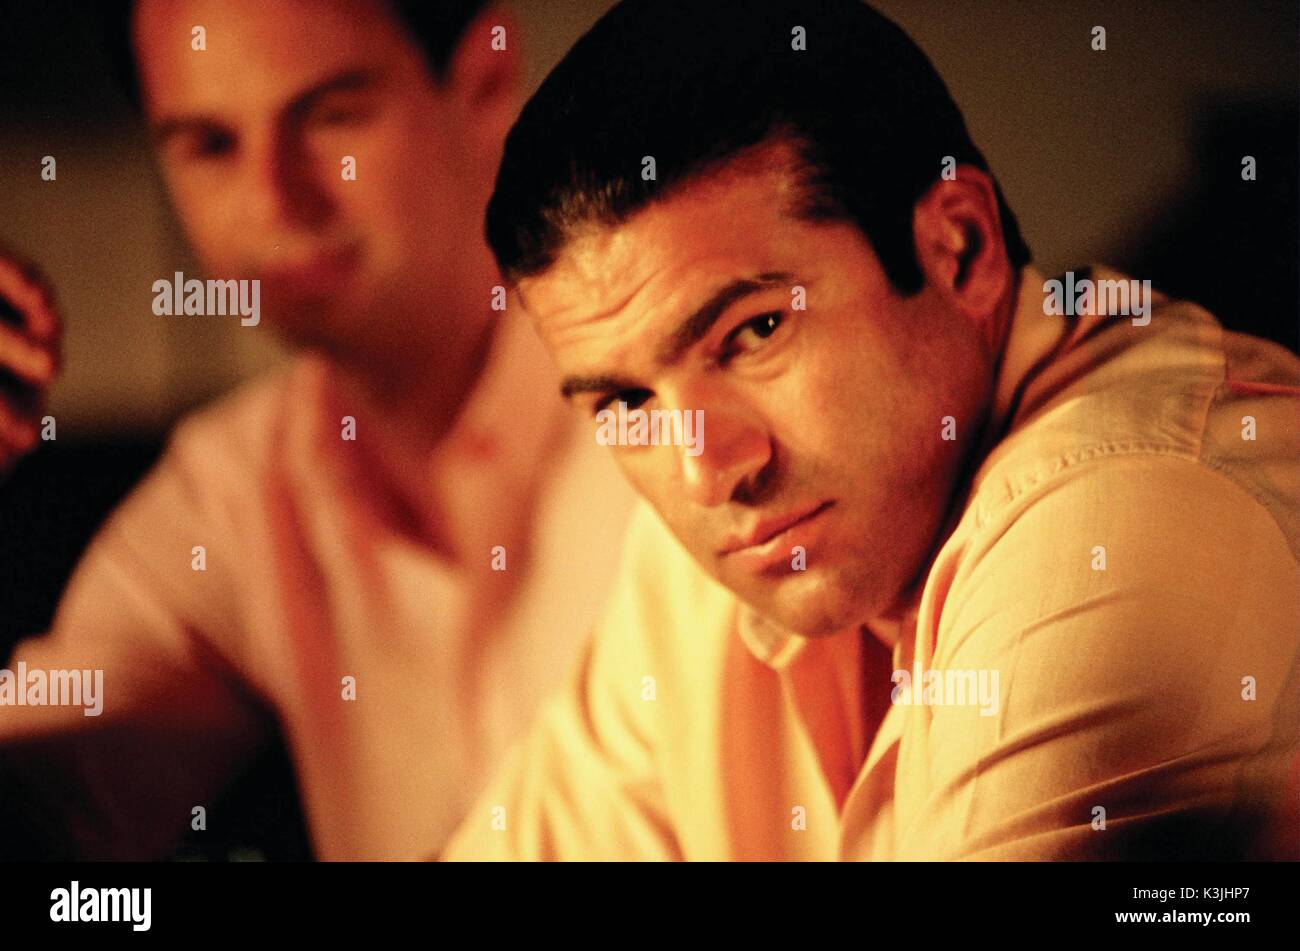 THE BUSINESS Tamer Hassan as Charlie with Danny Dyer as Frankie in the background.     Date: 2005 Stock Photo